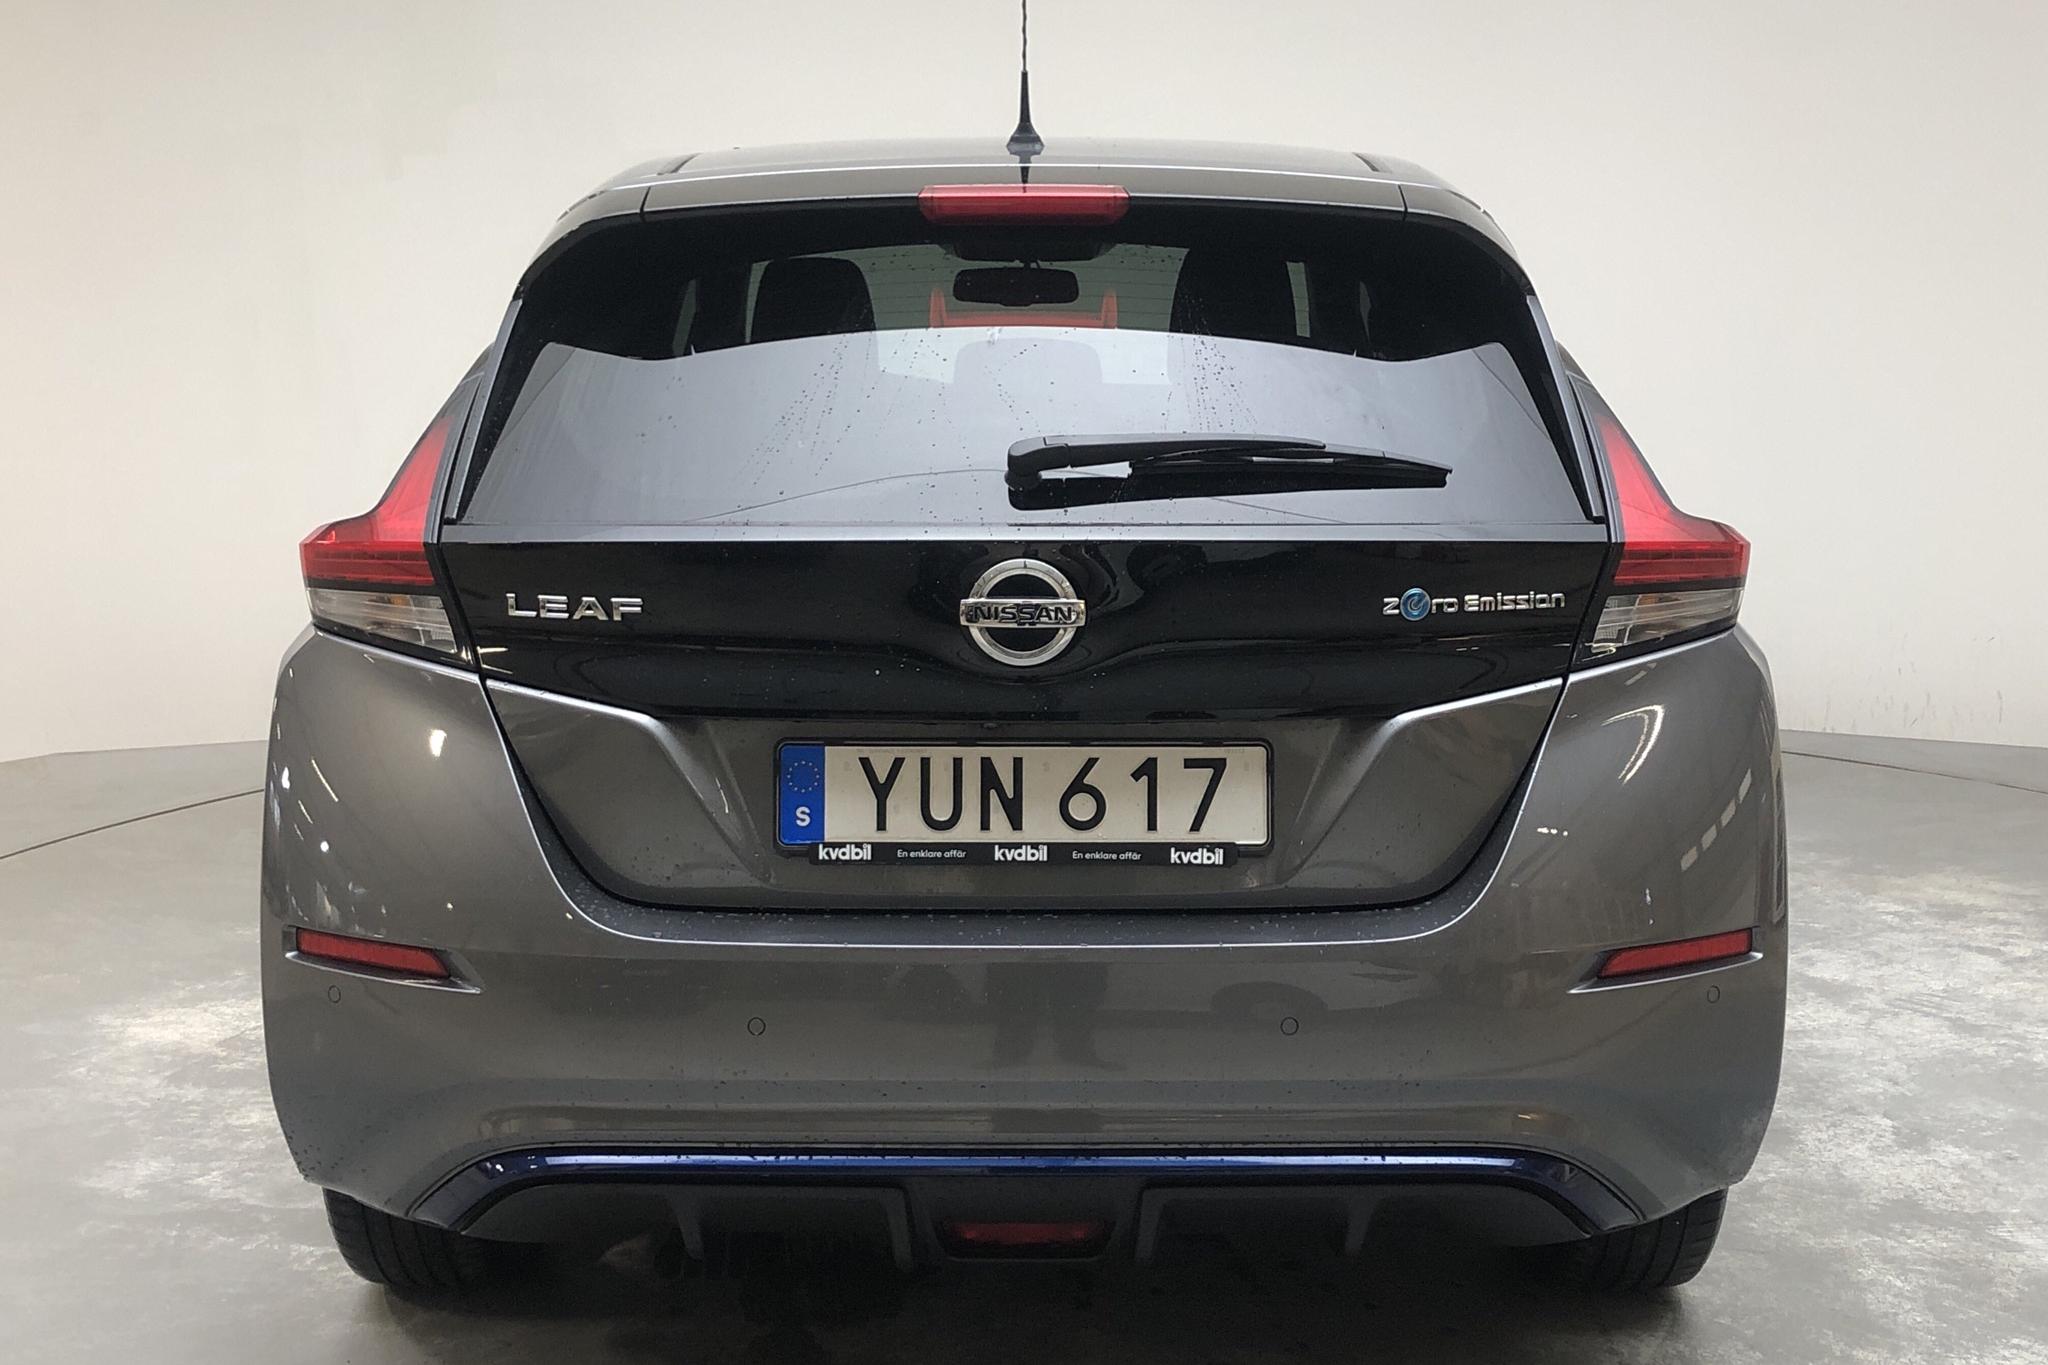 Nissan LEAF 5dr 39 kWh (150hk) - 121 800 km - Automatic - gray - 2019